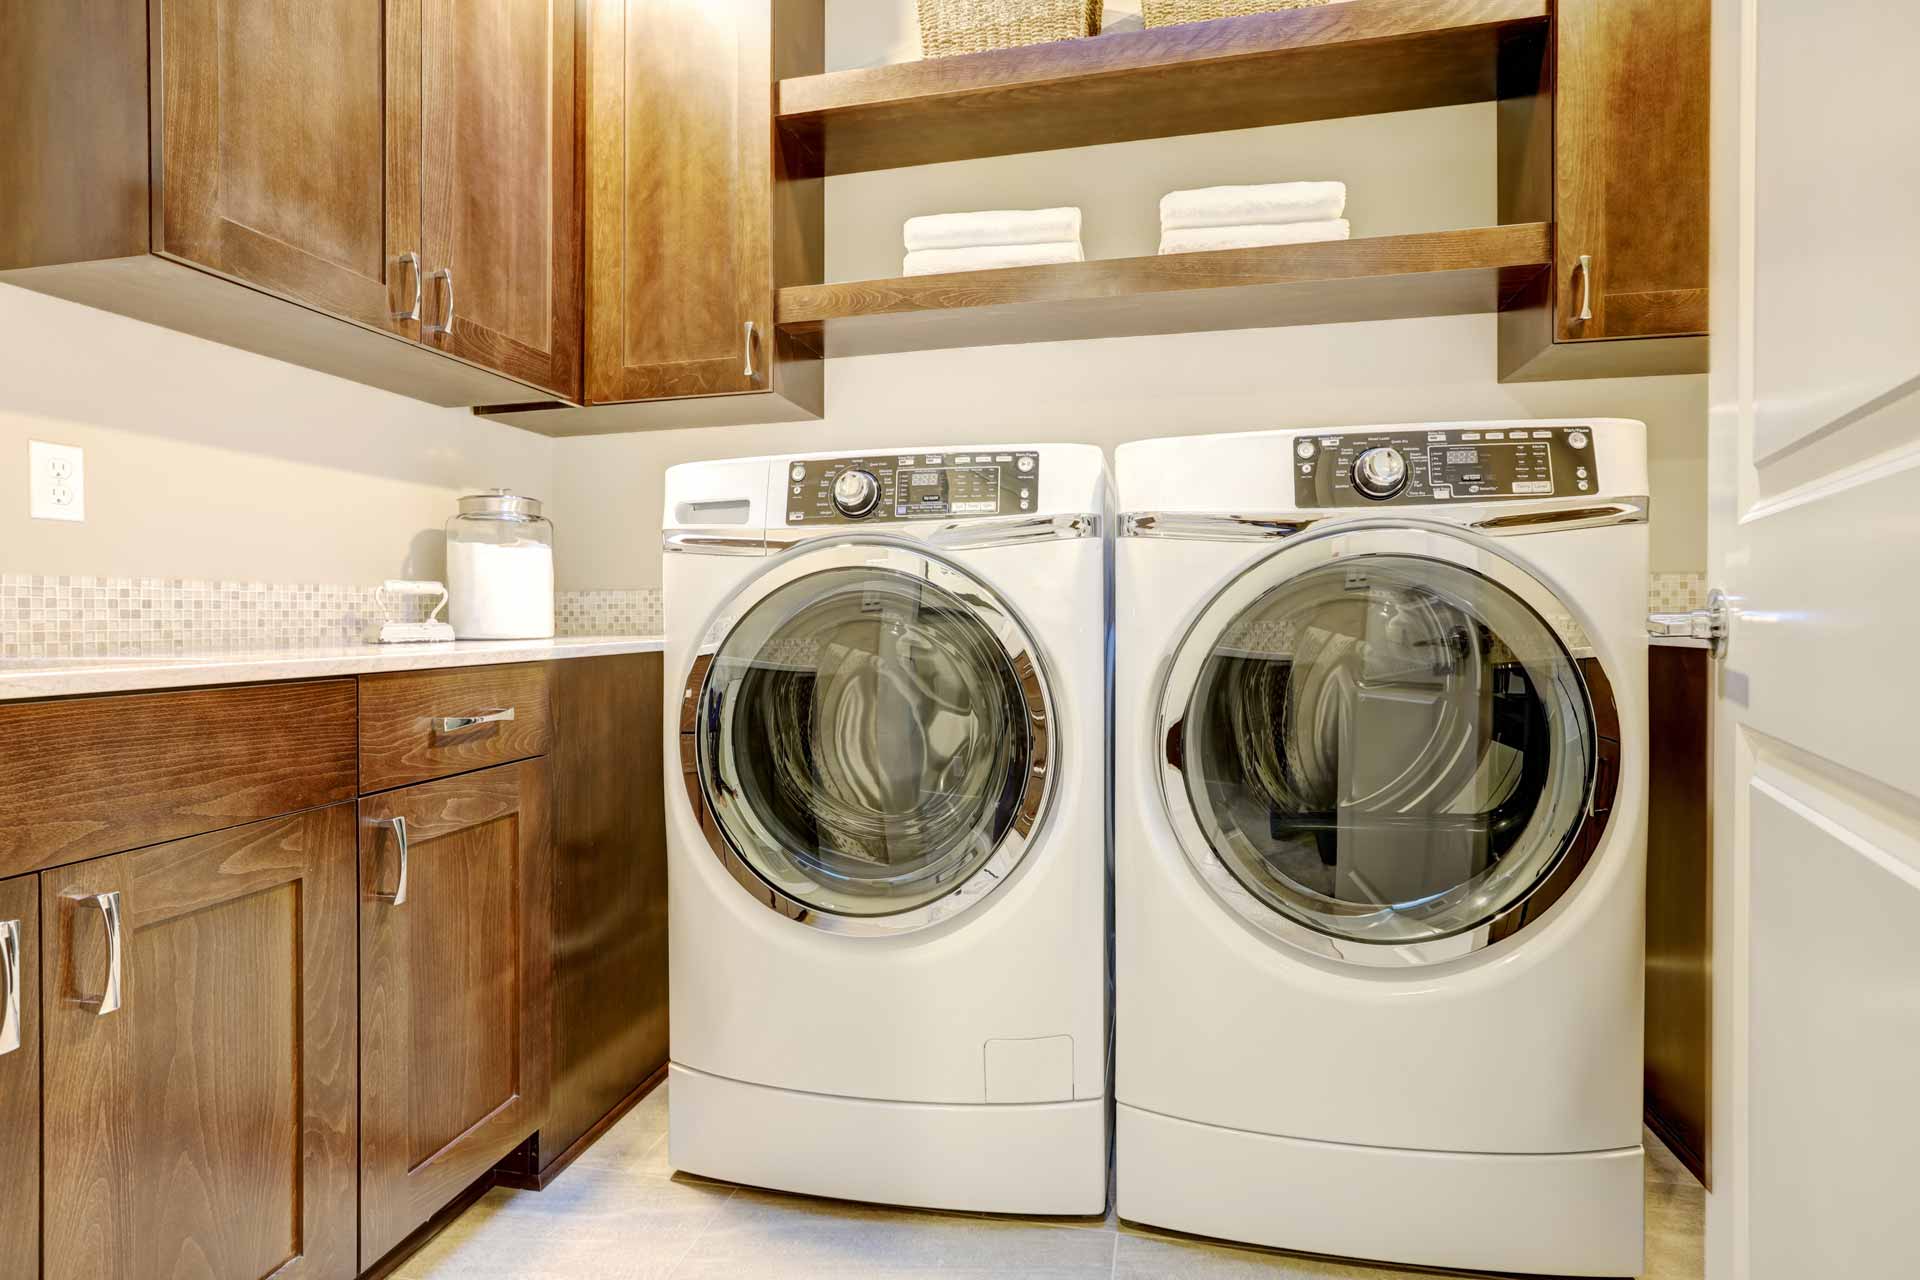 Washer and dryer side-by-side in laundry room